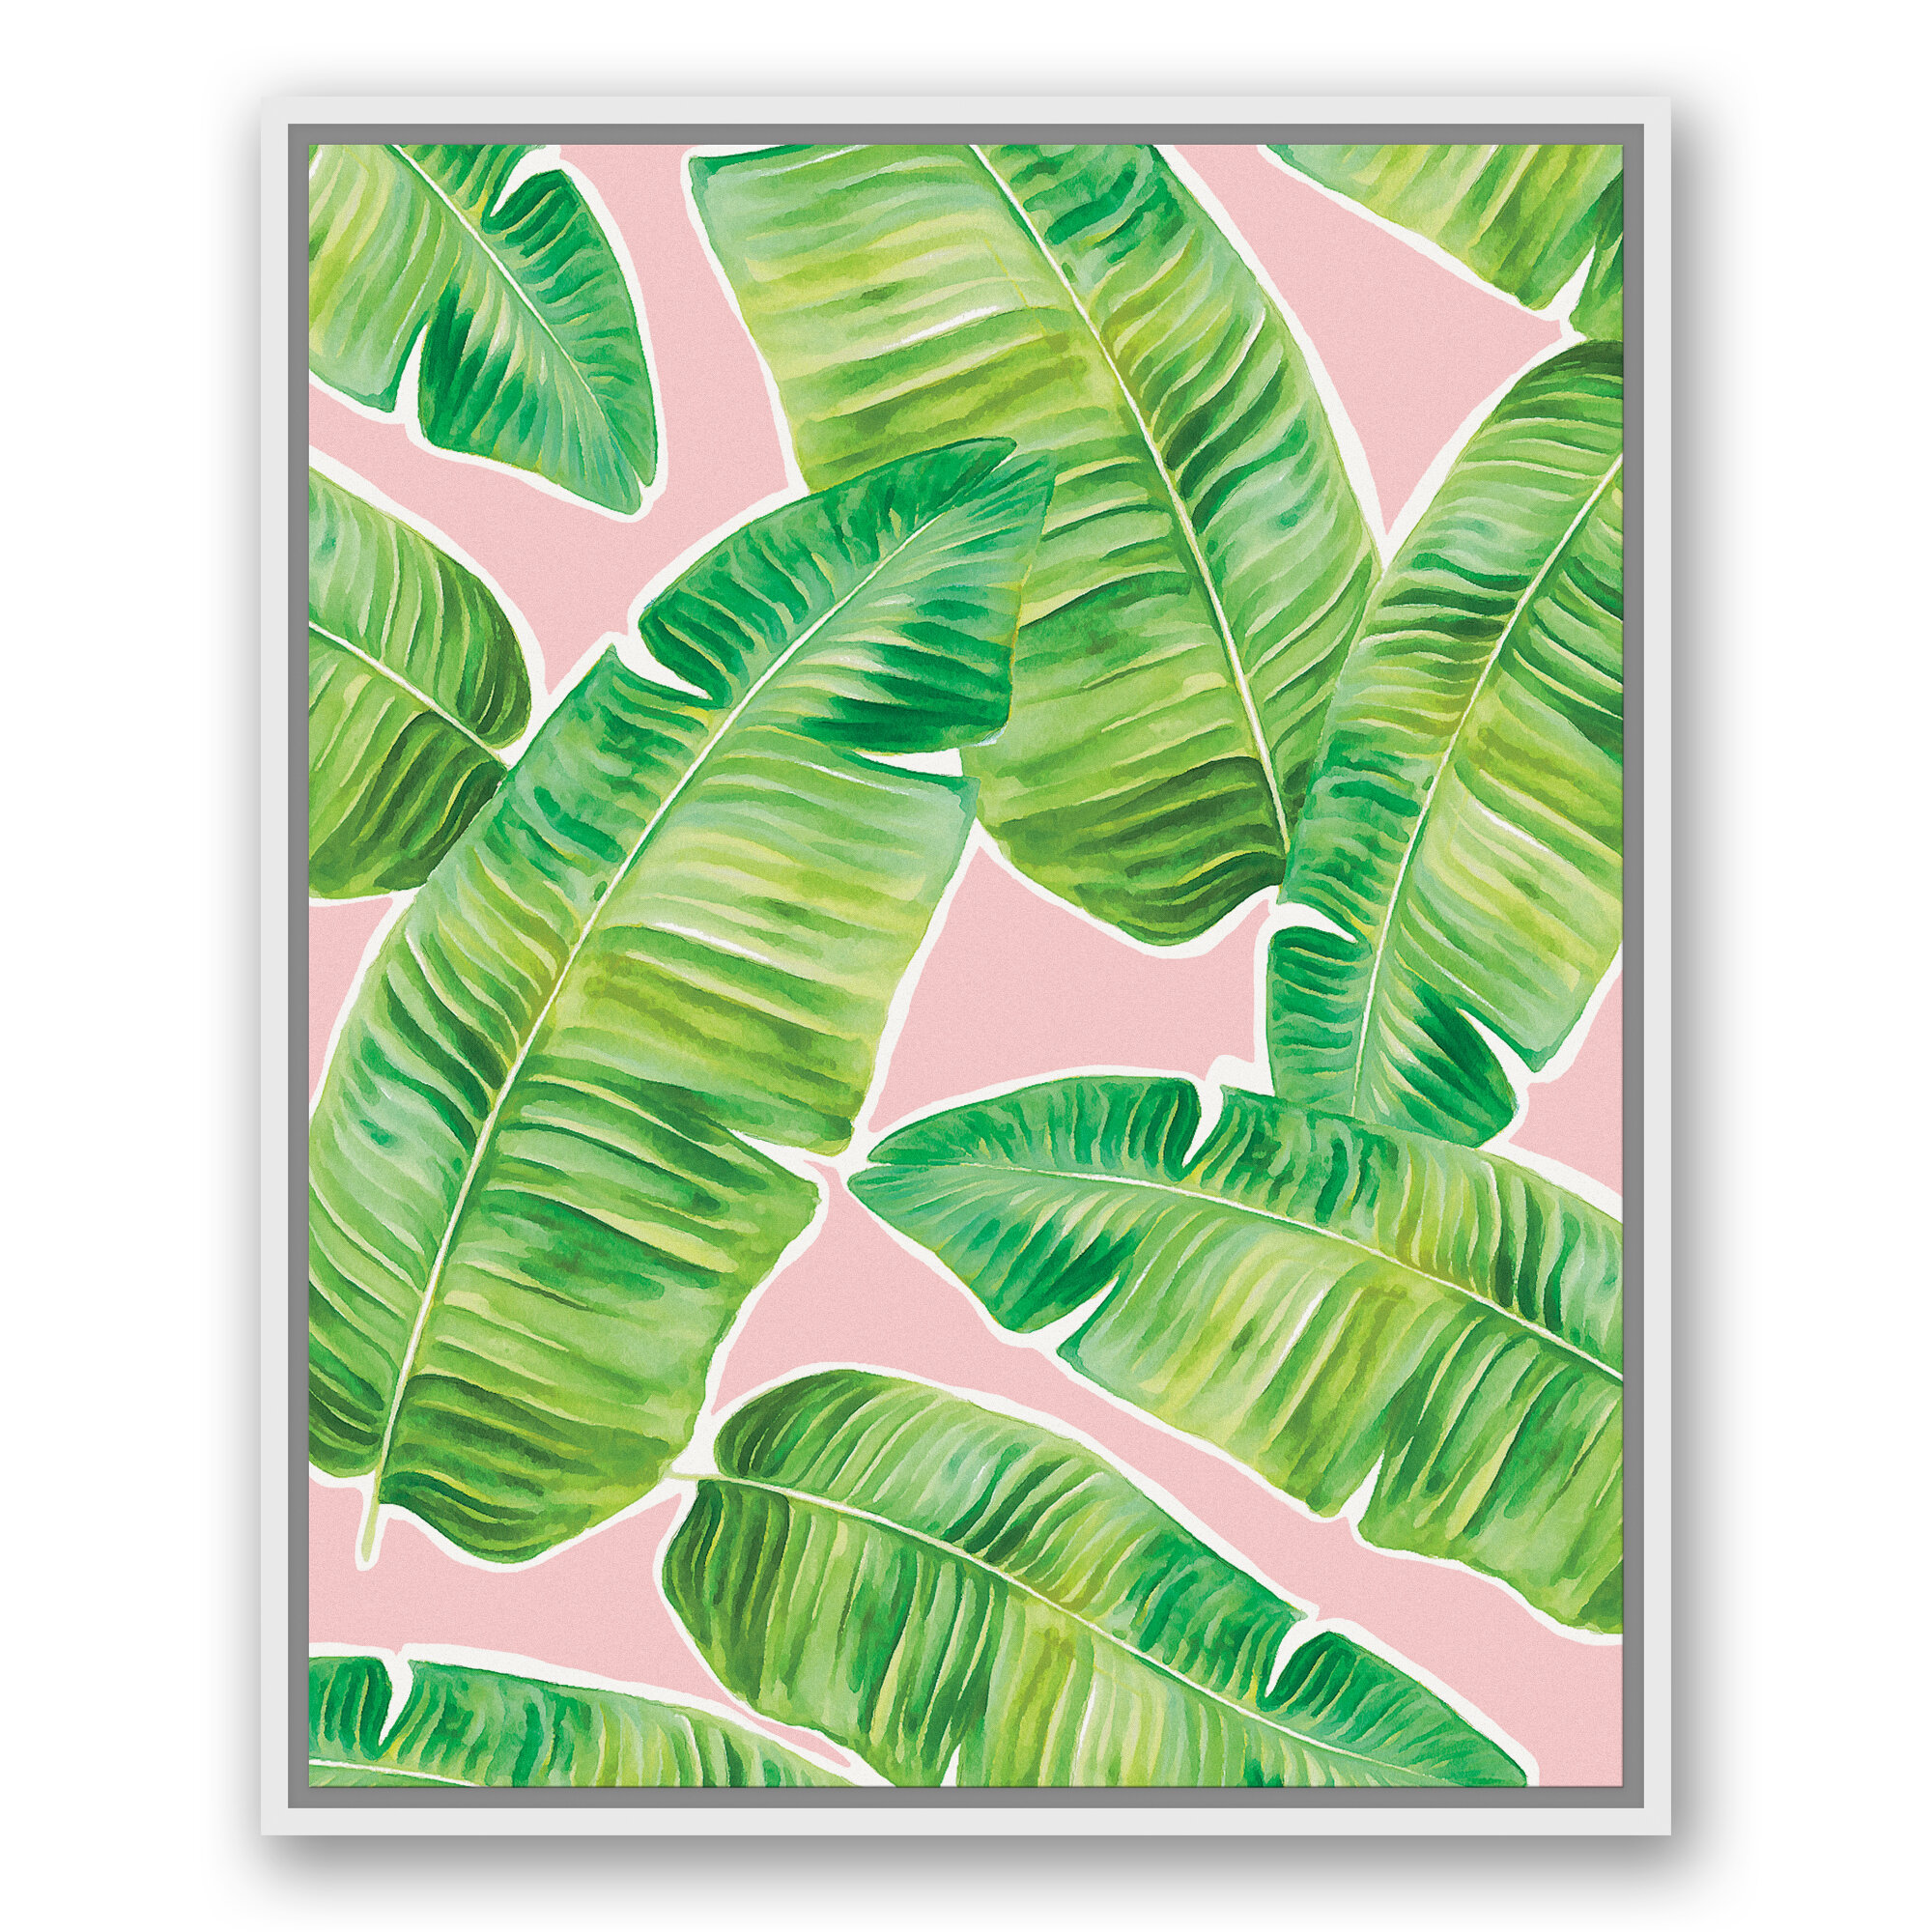 Bay Isle Home Green Palm Leaves On Pink Background Framed Watercolor Painting Print On Canvas Wayfair